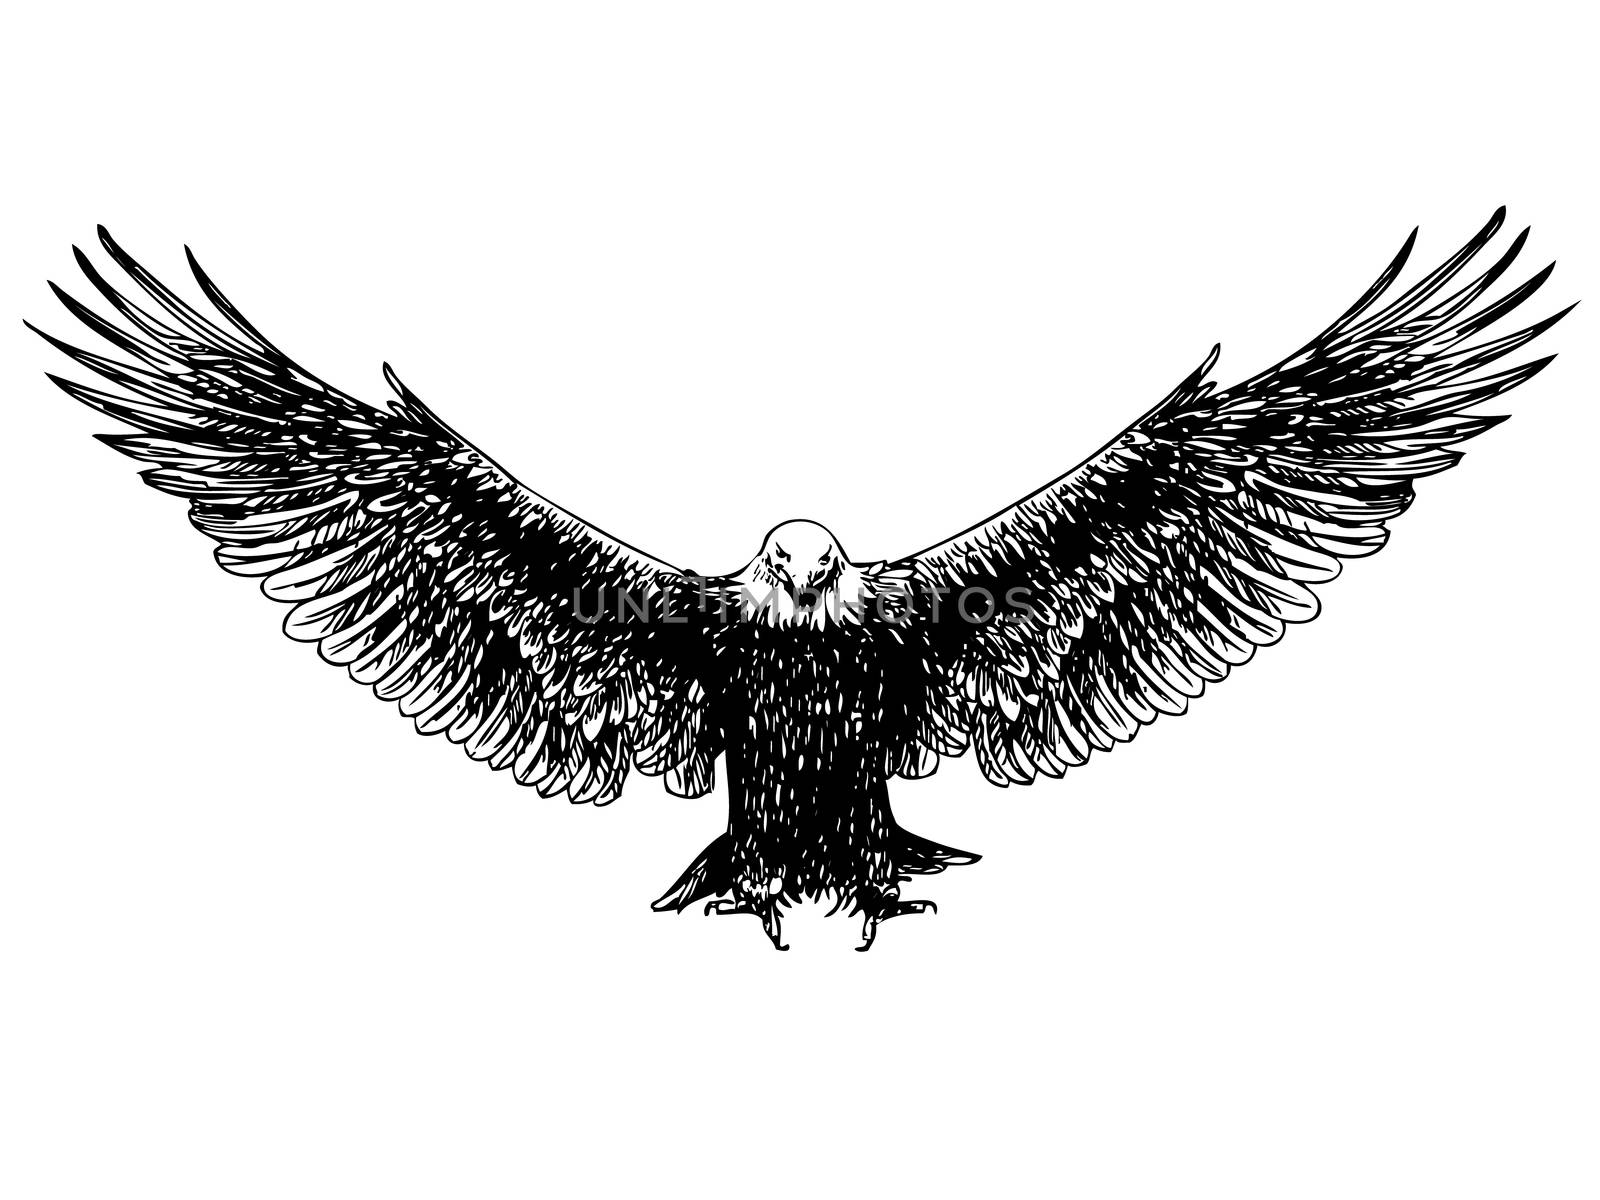 freehand sketch of flying eagle hand drawn on white background